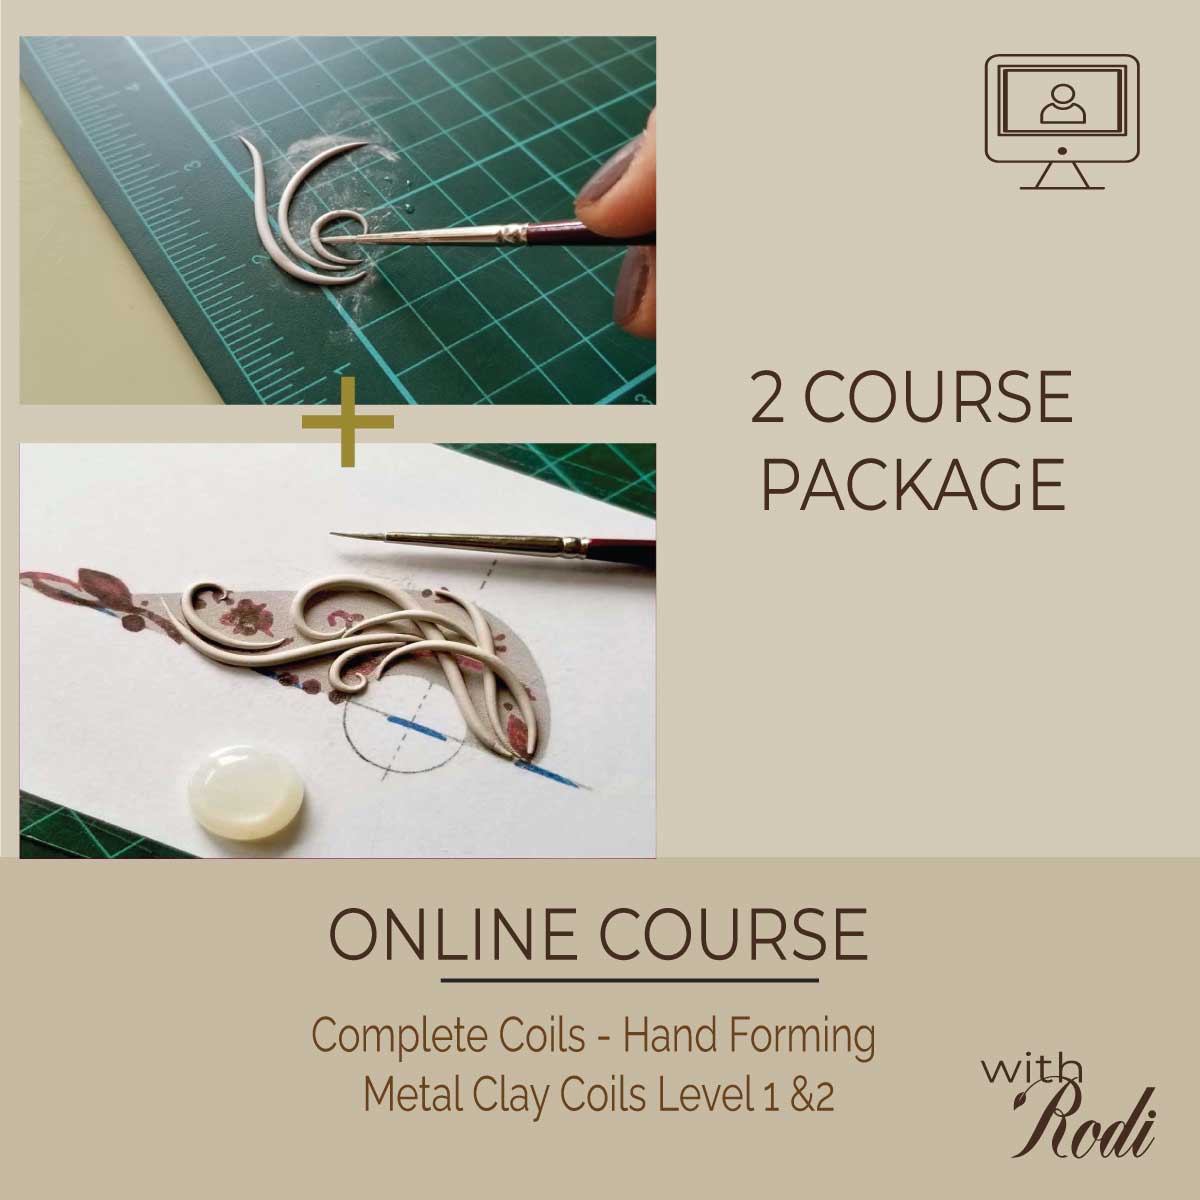 Complete Coils - Forming Metal Clay Coils Level 1 & 2